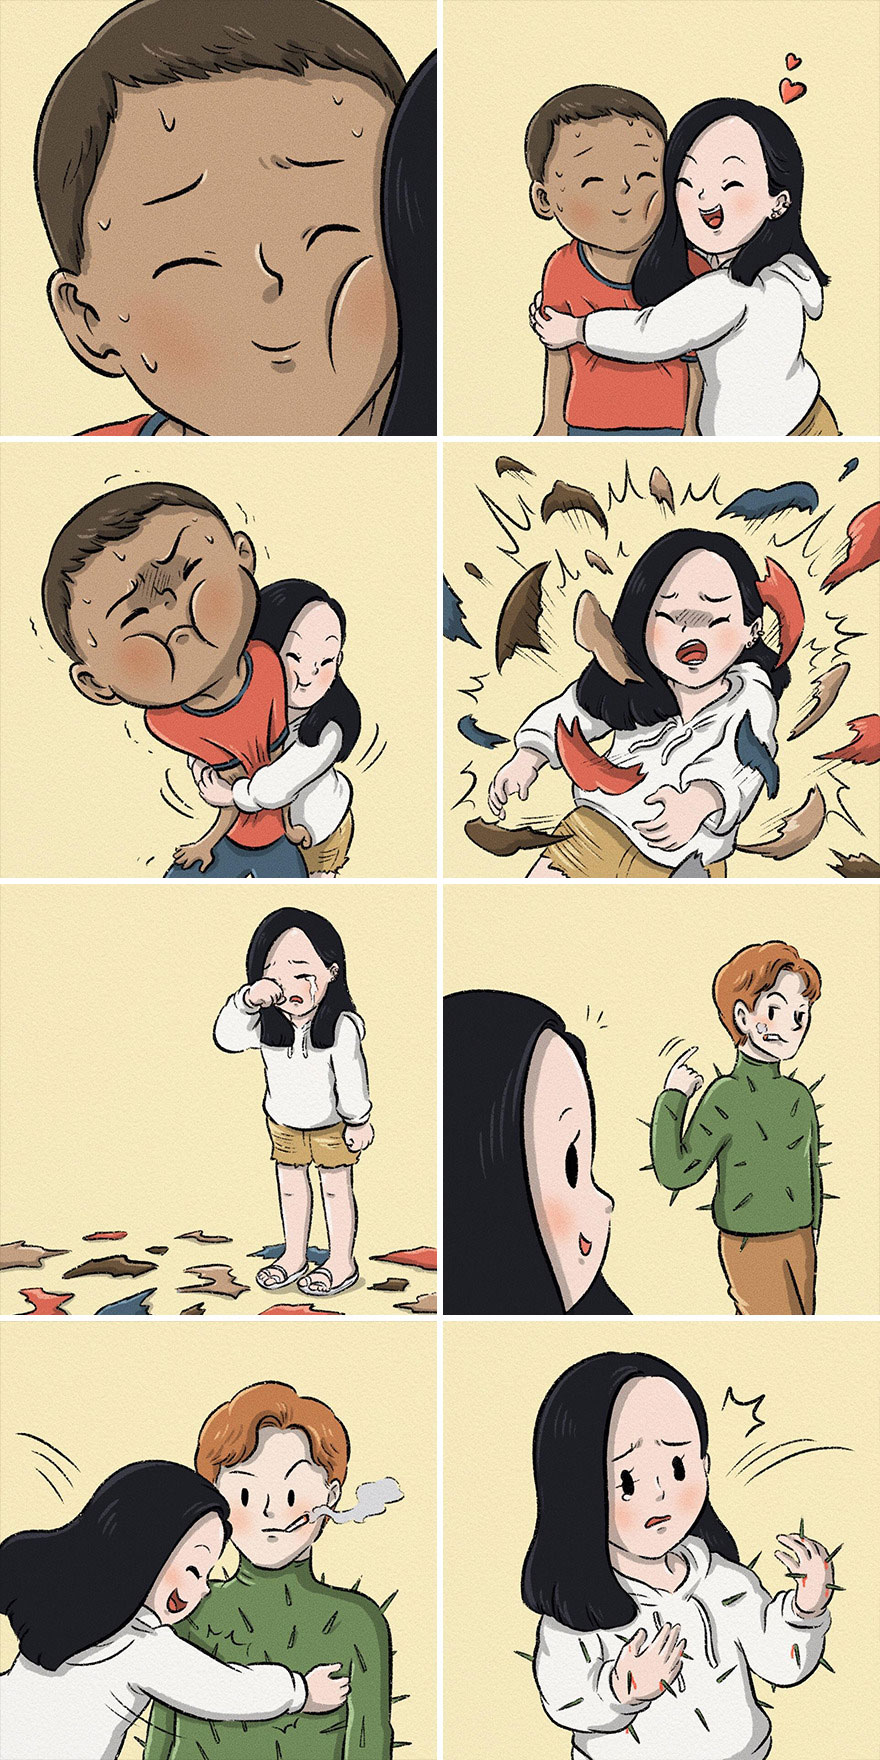 Thai Illustrator Makes Colorful Comics That Take Unexpected Turns And Here Are 18 Of The Best Ones